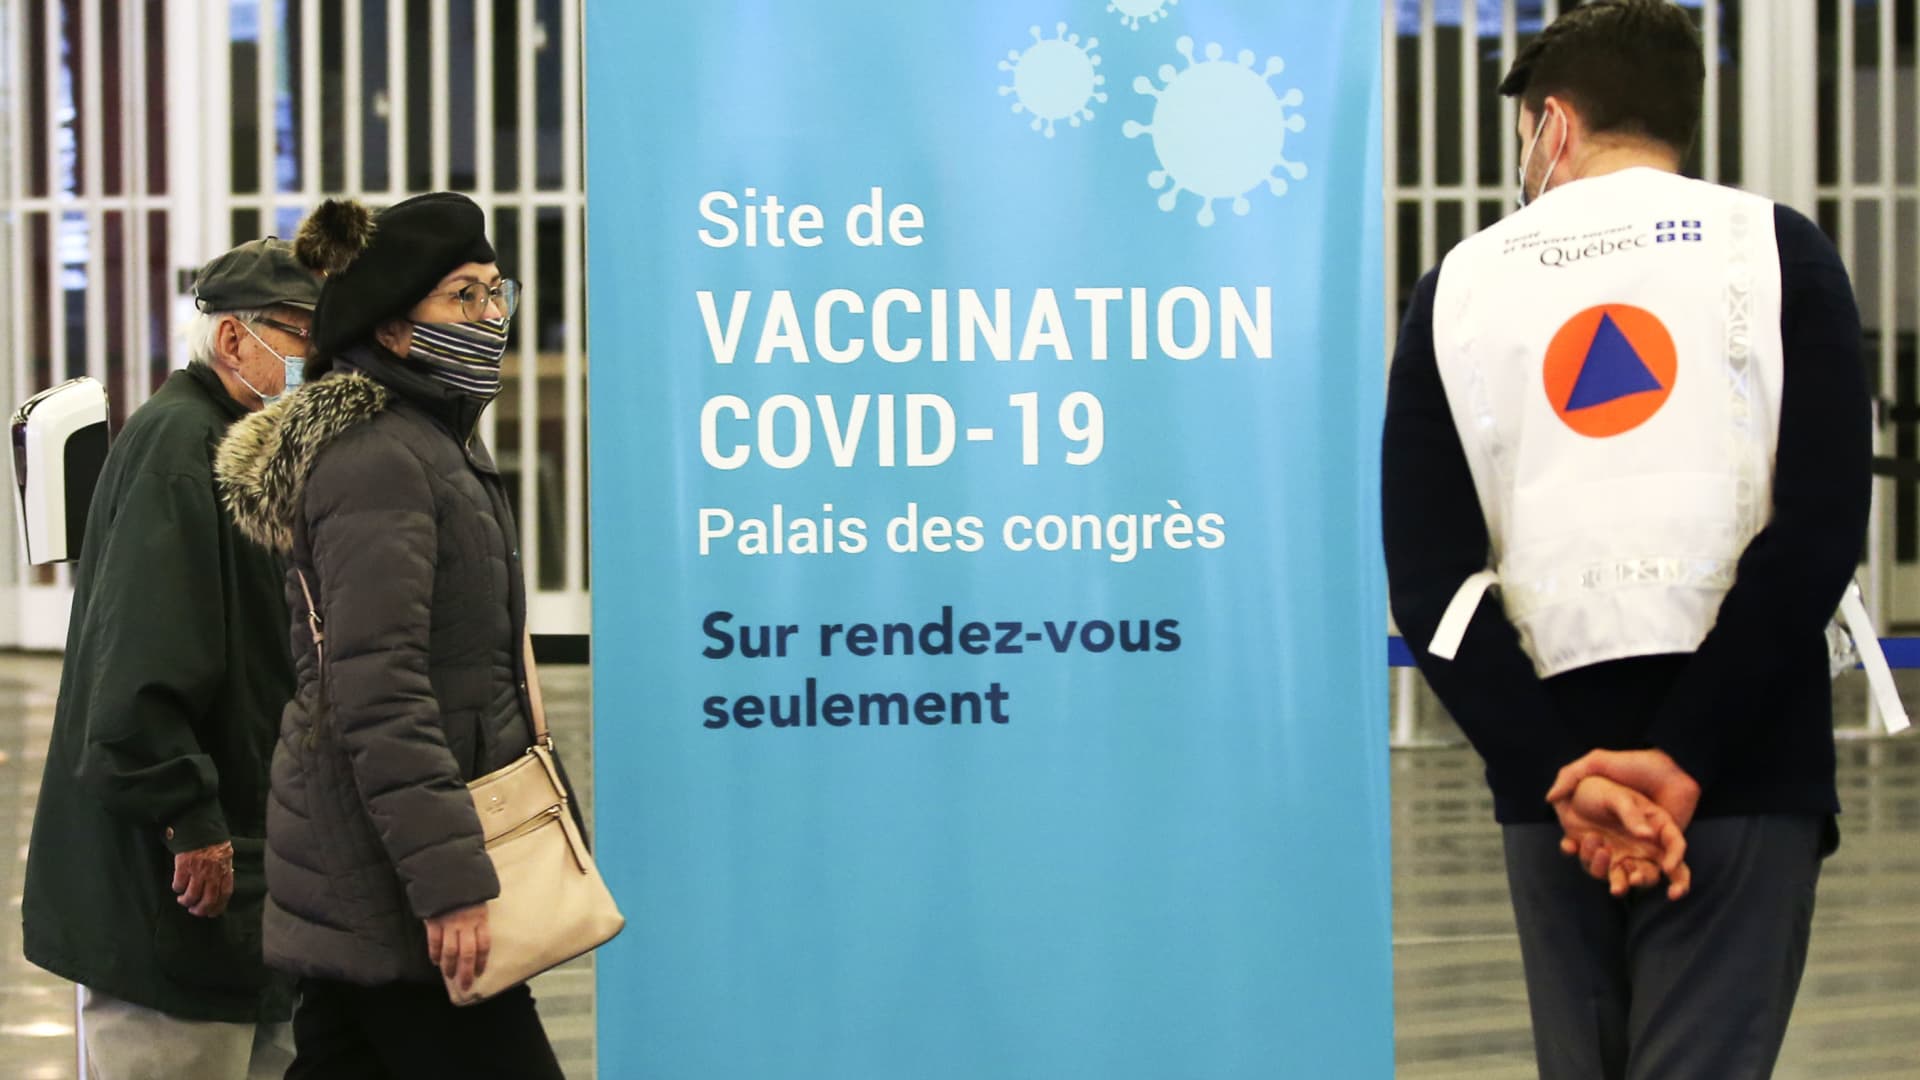 People arrive to be vaccinated at the Palais Des Congres convention centre in Montreal, Quebec, Canada, on Monday, March 1, 2021.